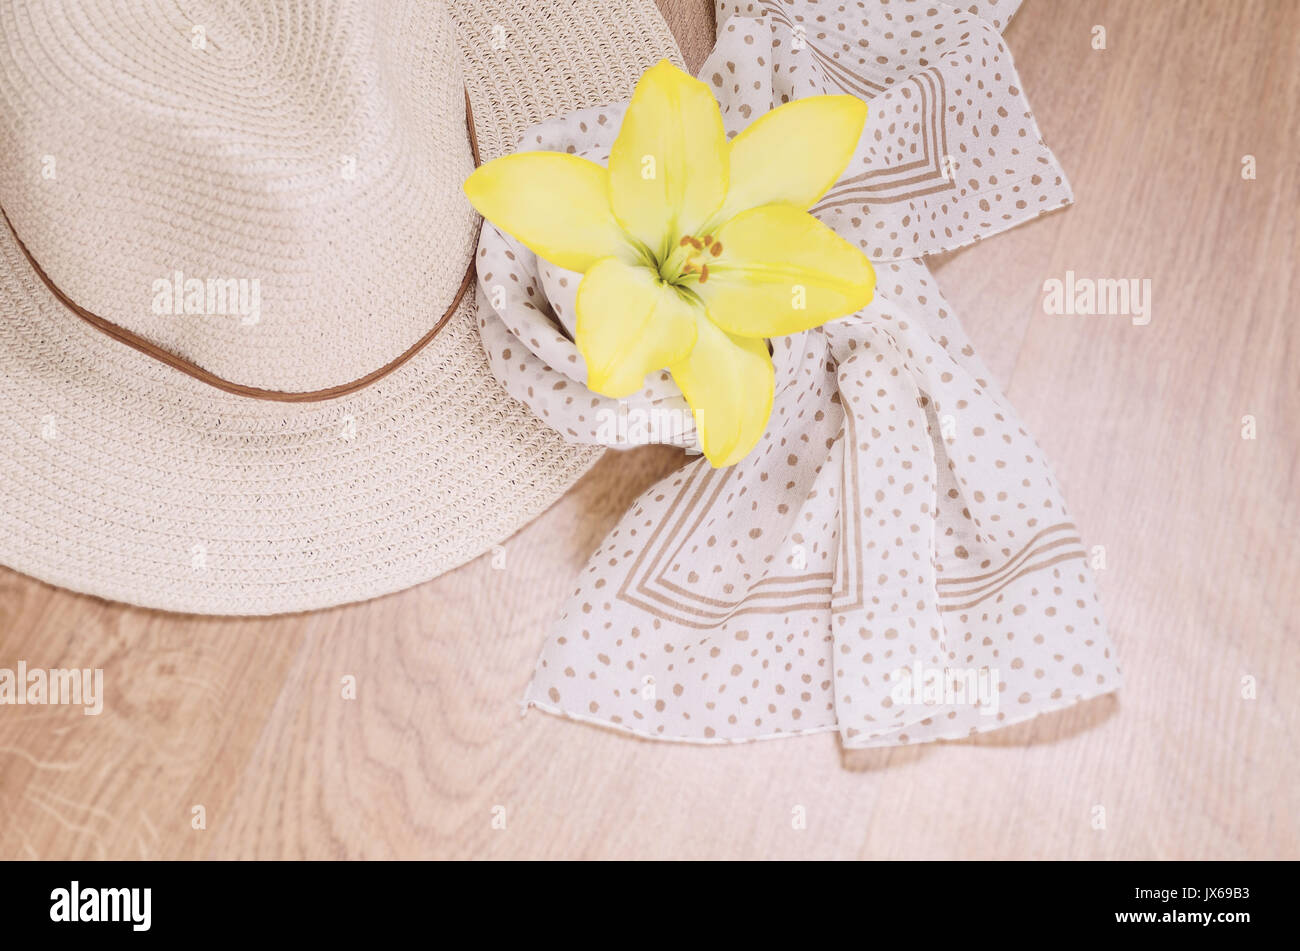 Straw hat, a light scarf and a jellied flower on a wooden background. Things for a trip or a trip out of town for a weekend. Romantic mood. Flat lay.  Stock Photo